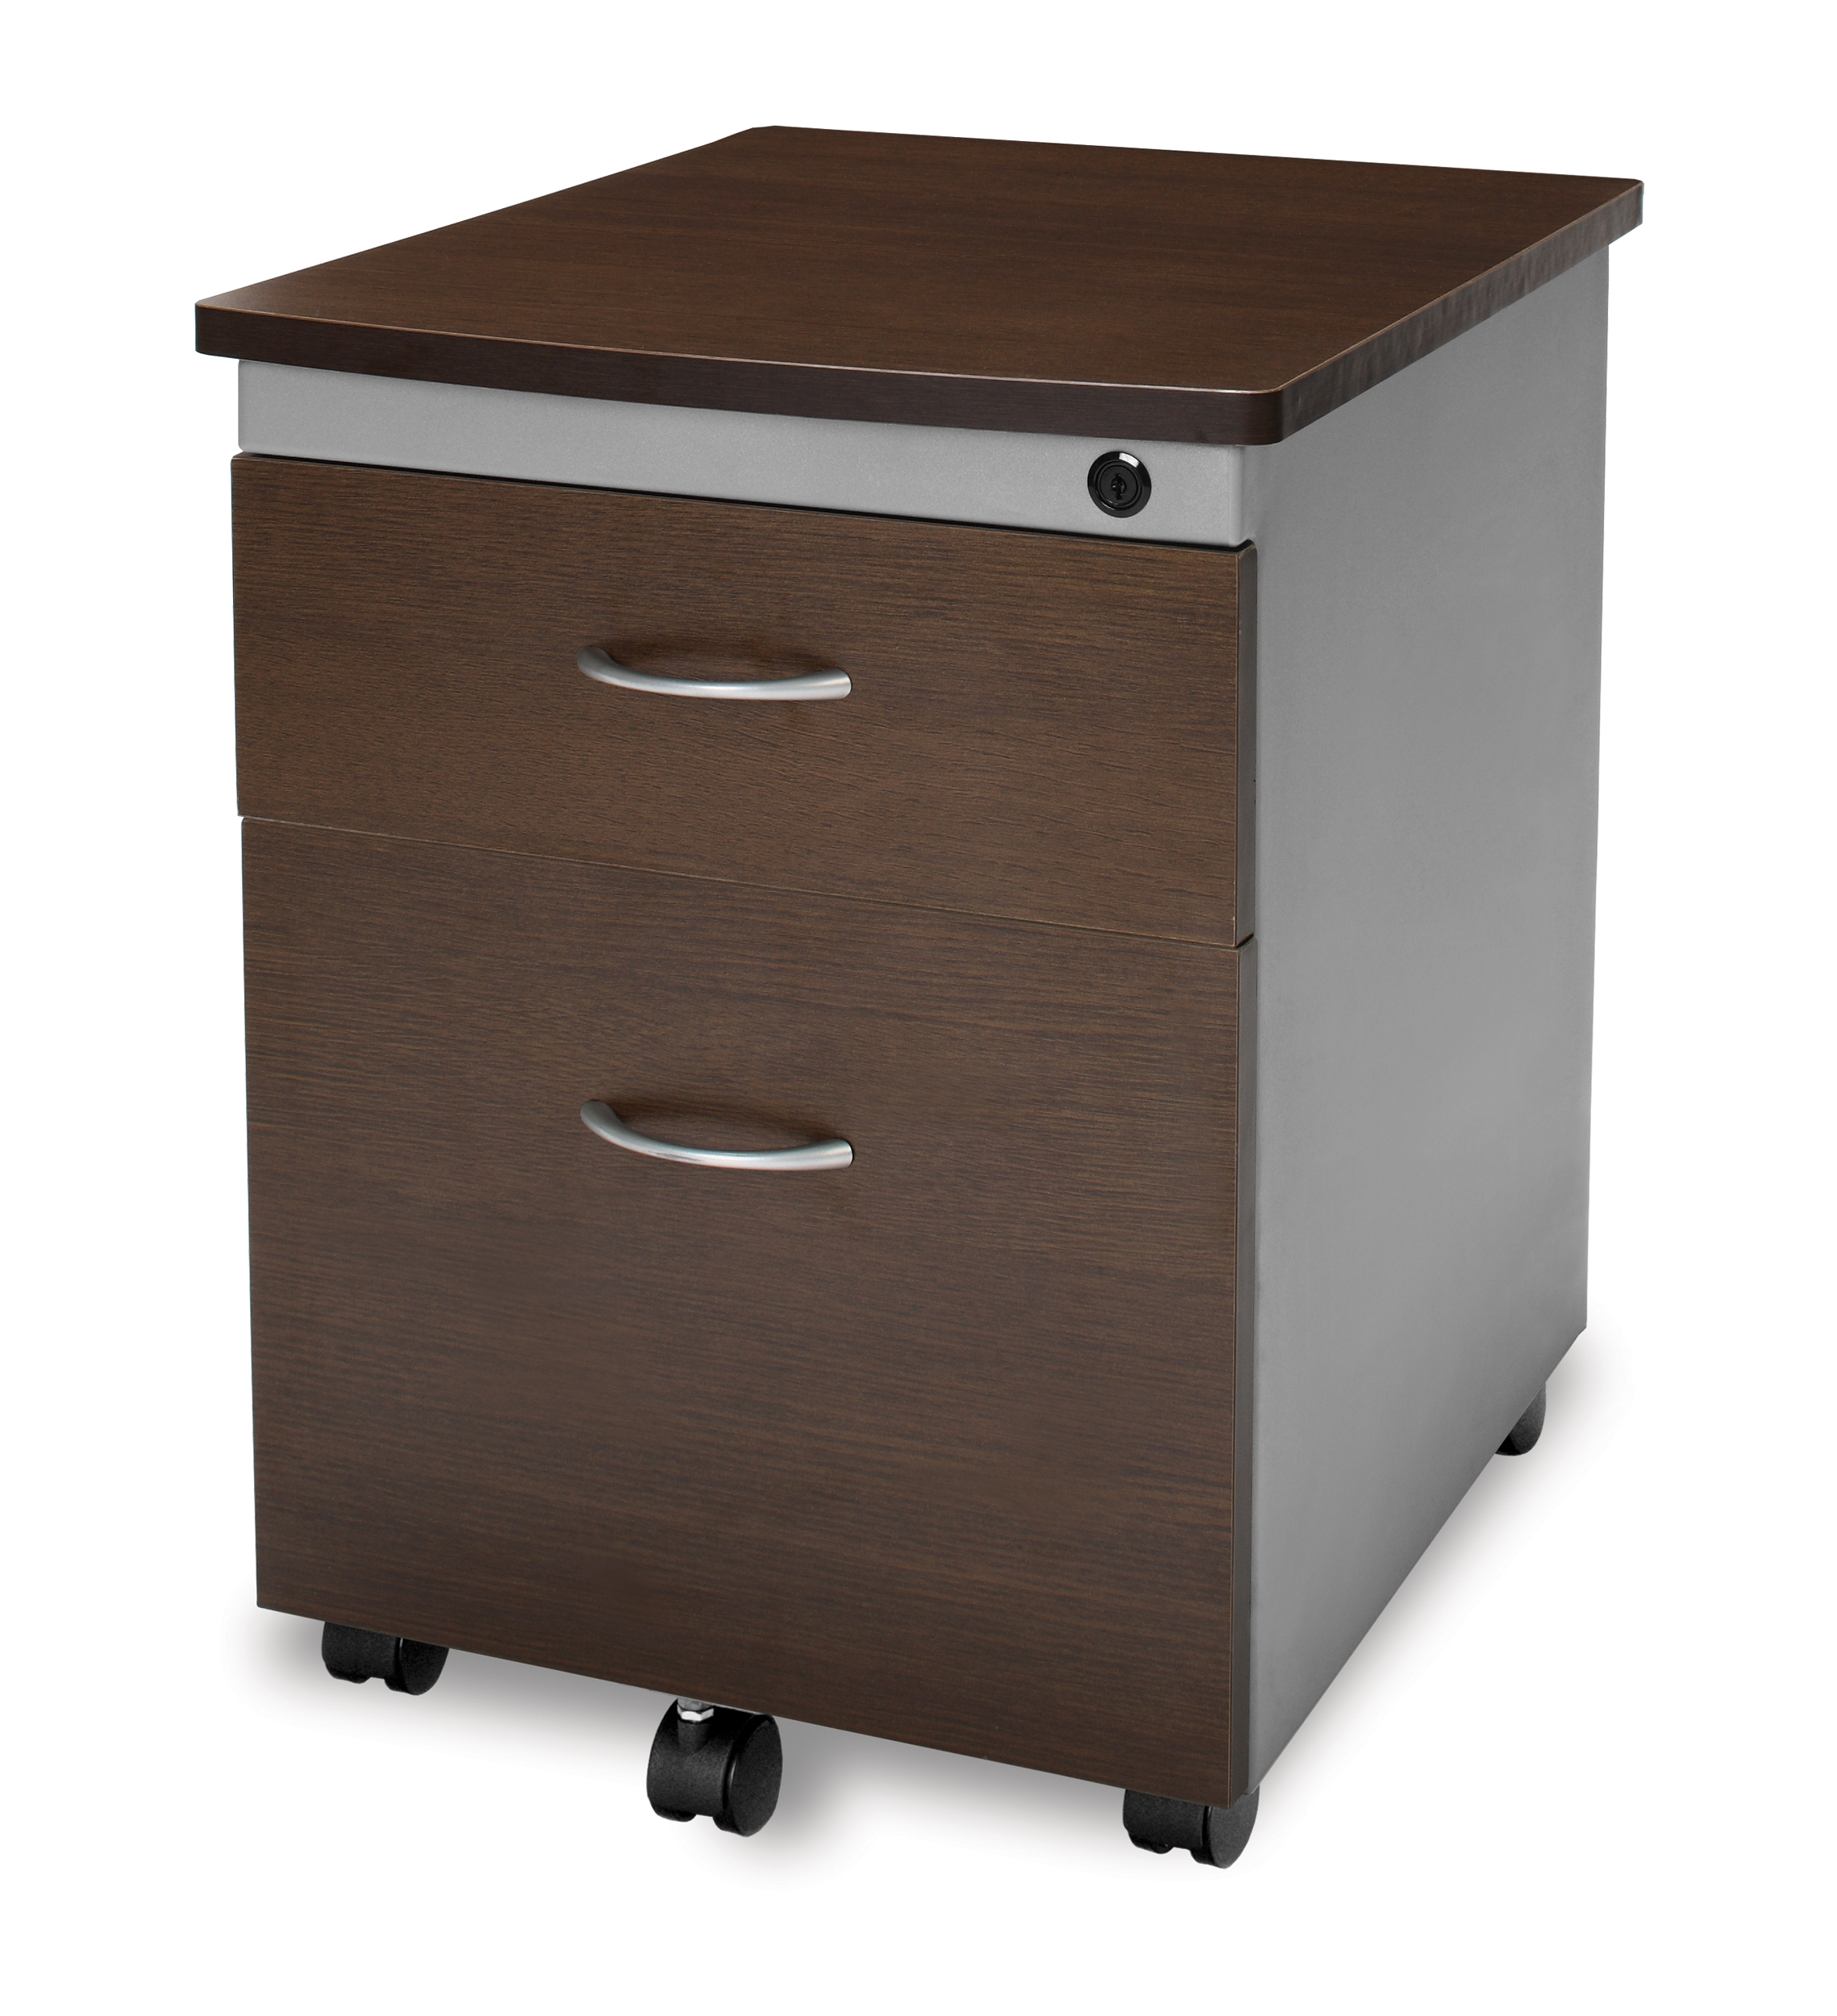 Ofm Model 55106 Modular Wheeled Mobile 2 Drawer File Cabinet with regard to size 2278 X 2500